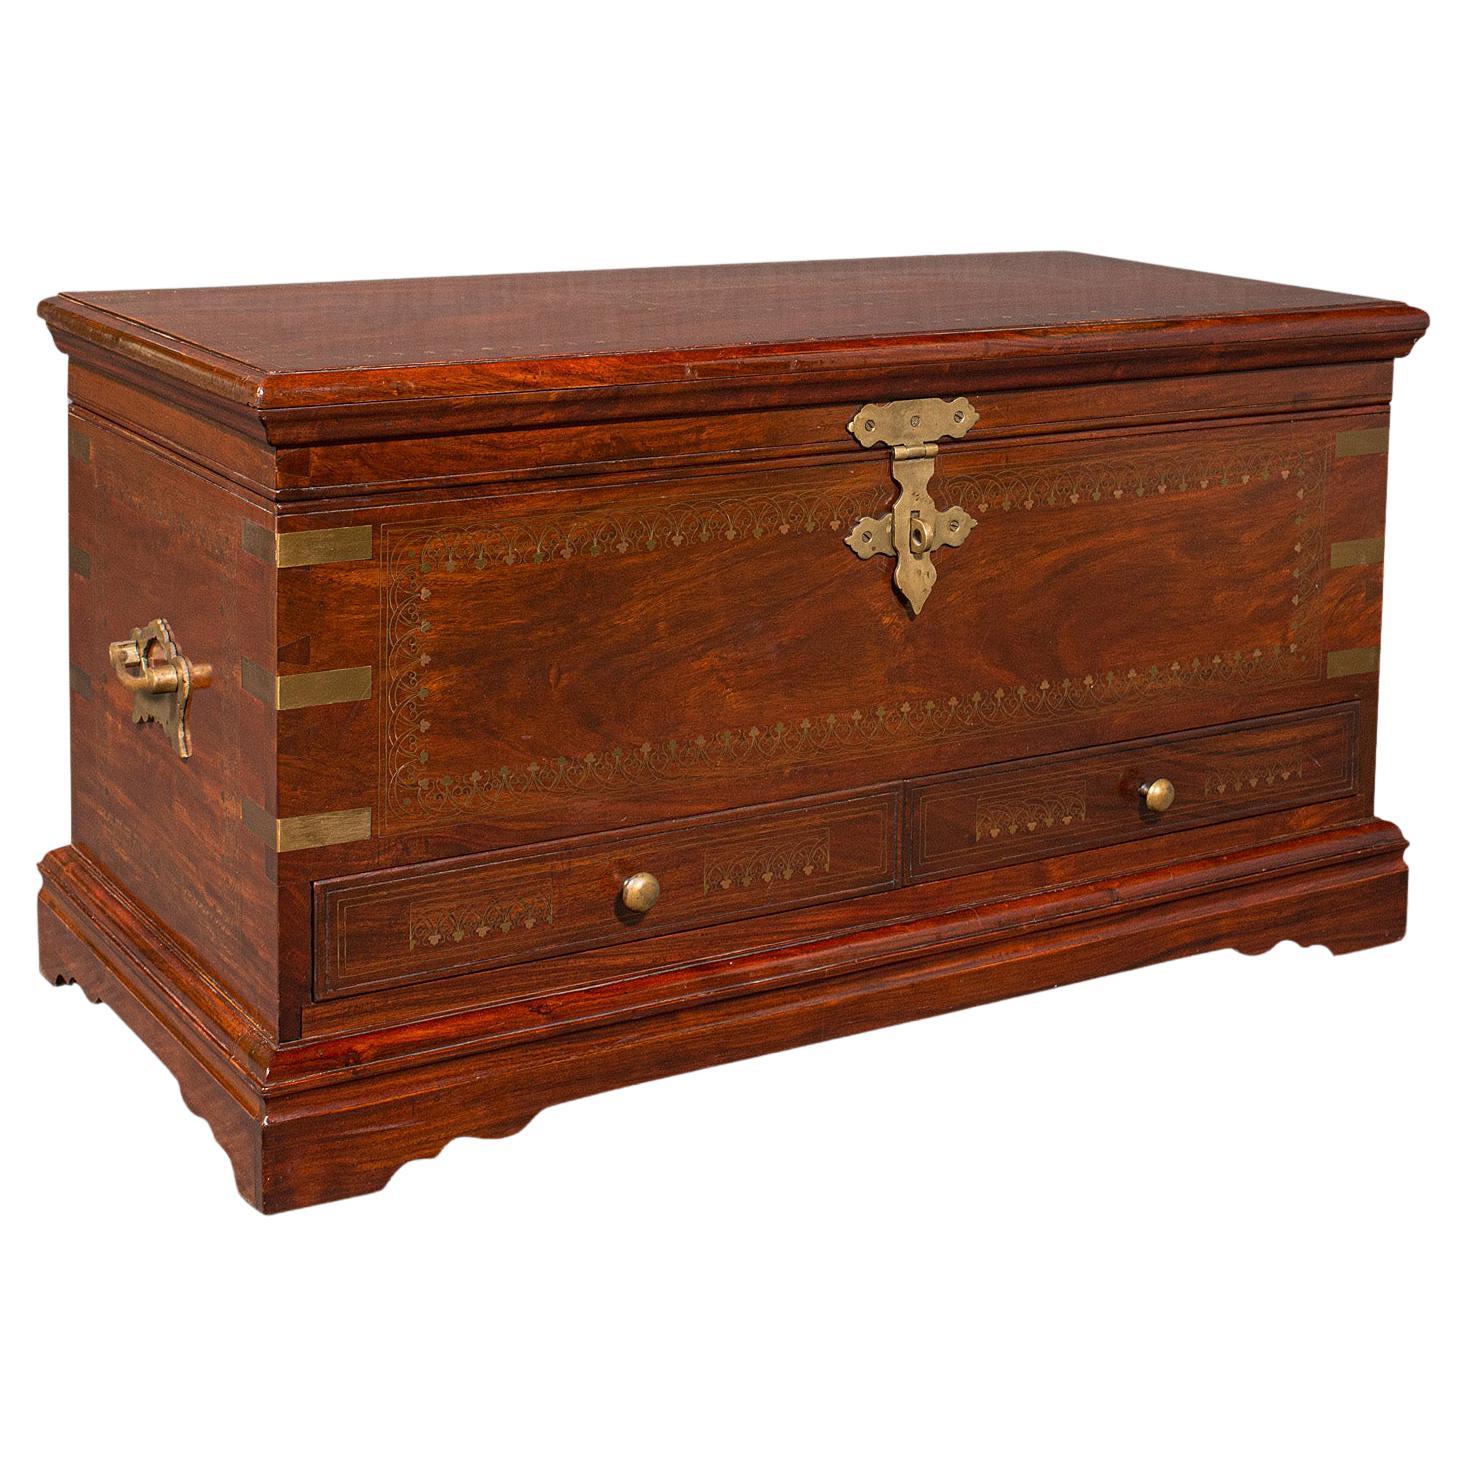 Large Vintage Tool Chest, Oriental, Carriage Trunk, Campaign, Mid 20th, C.1950 For Sale